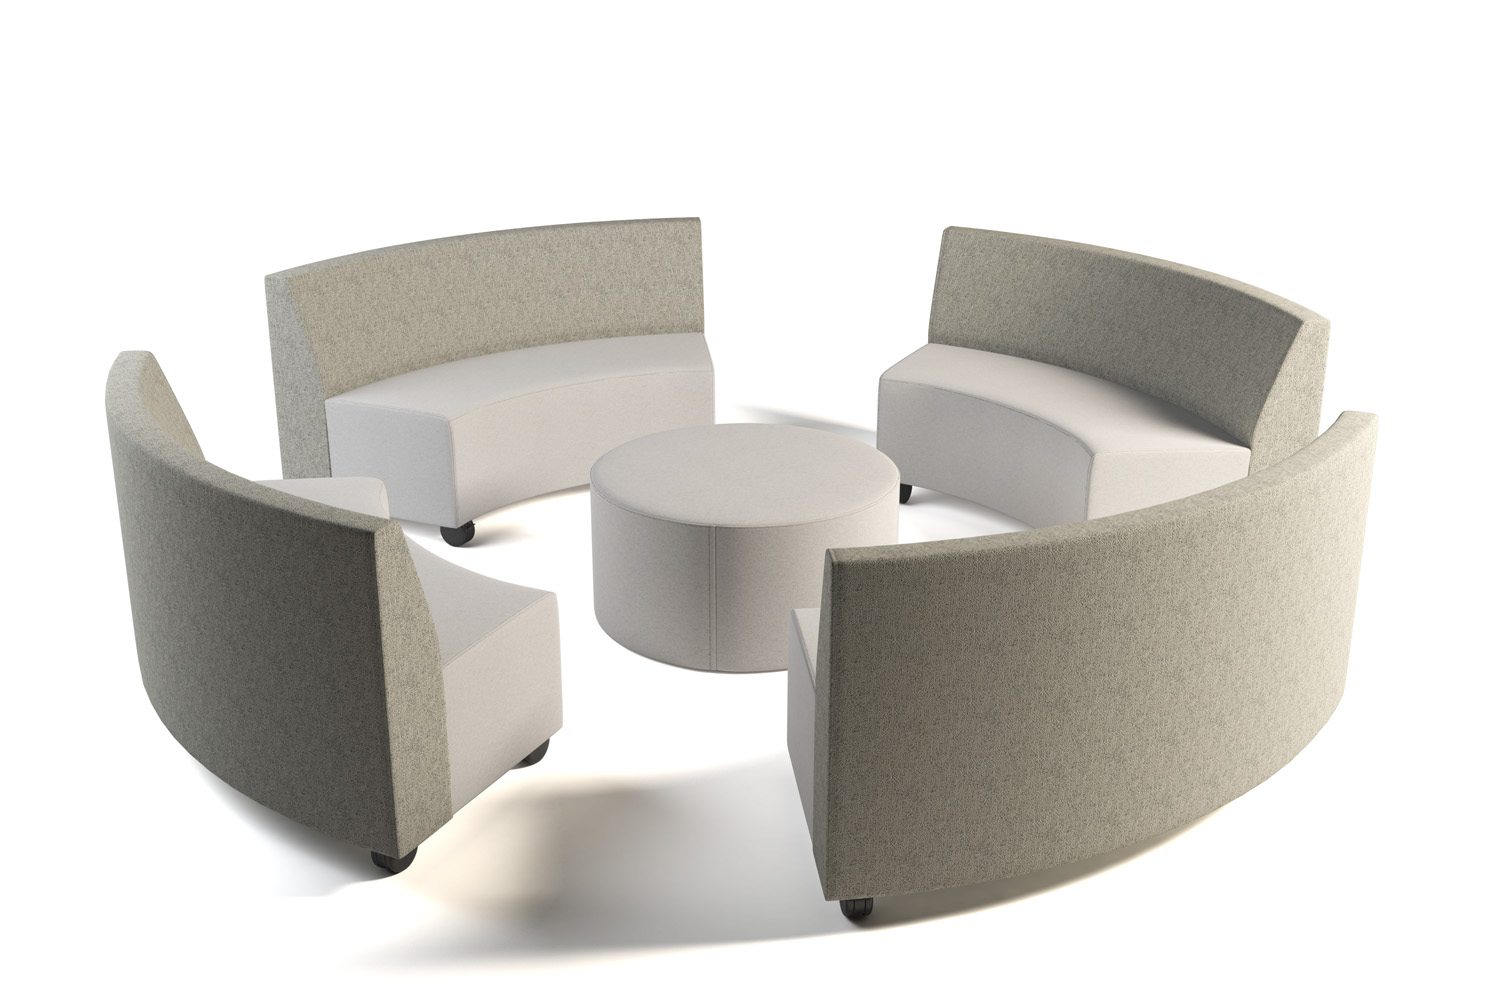 Raven Modular Circular Configuration with Casters